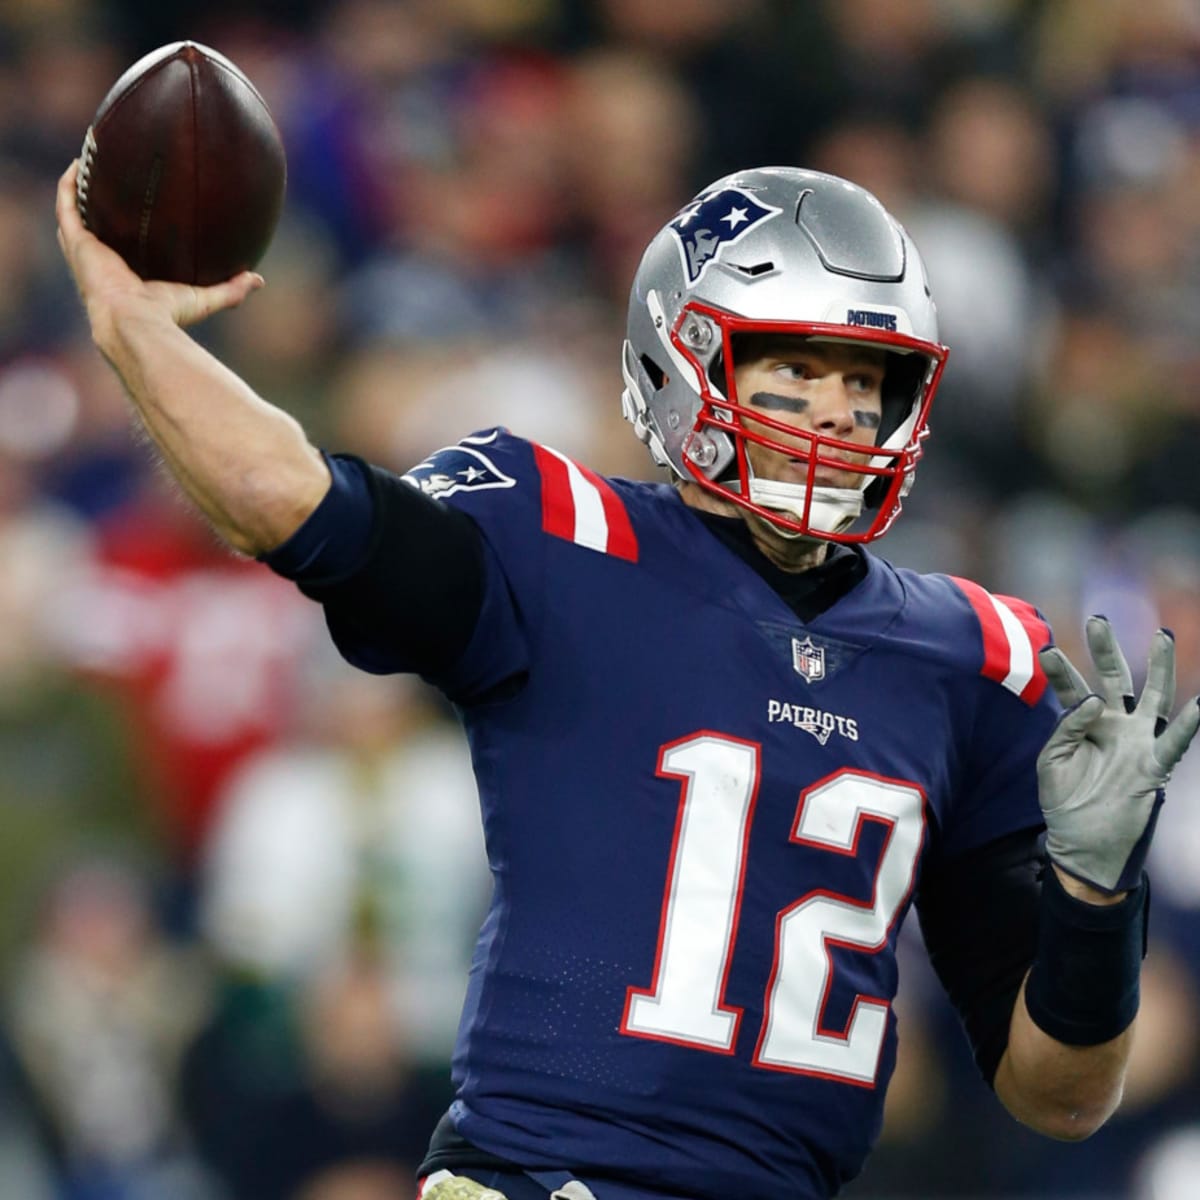 Tom Brady is Ranked the 2nd Best Player in the NFL by PFF